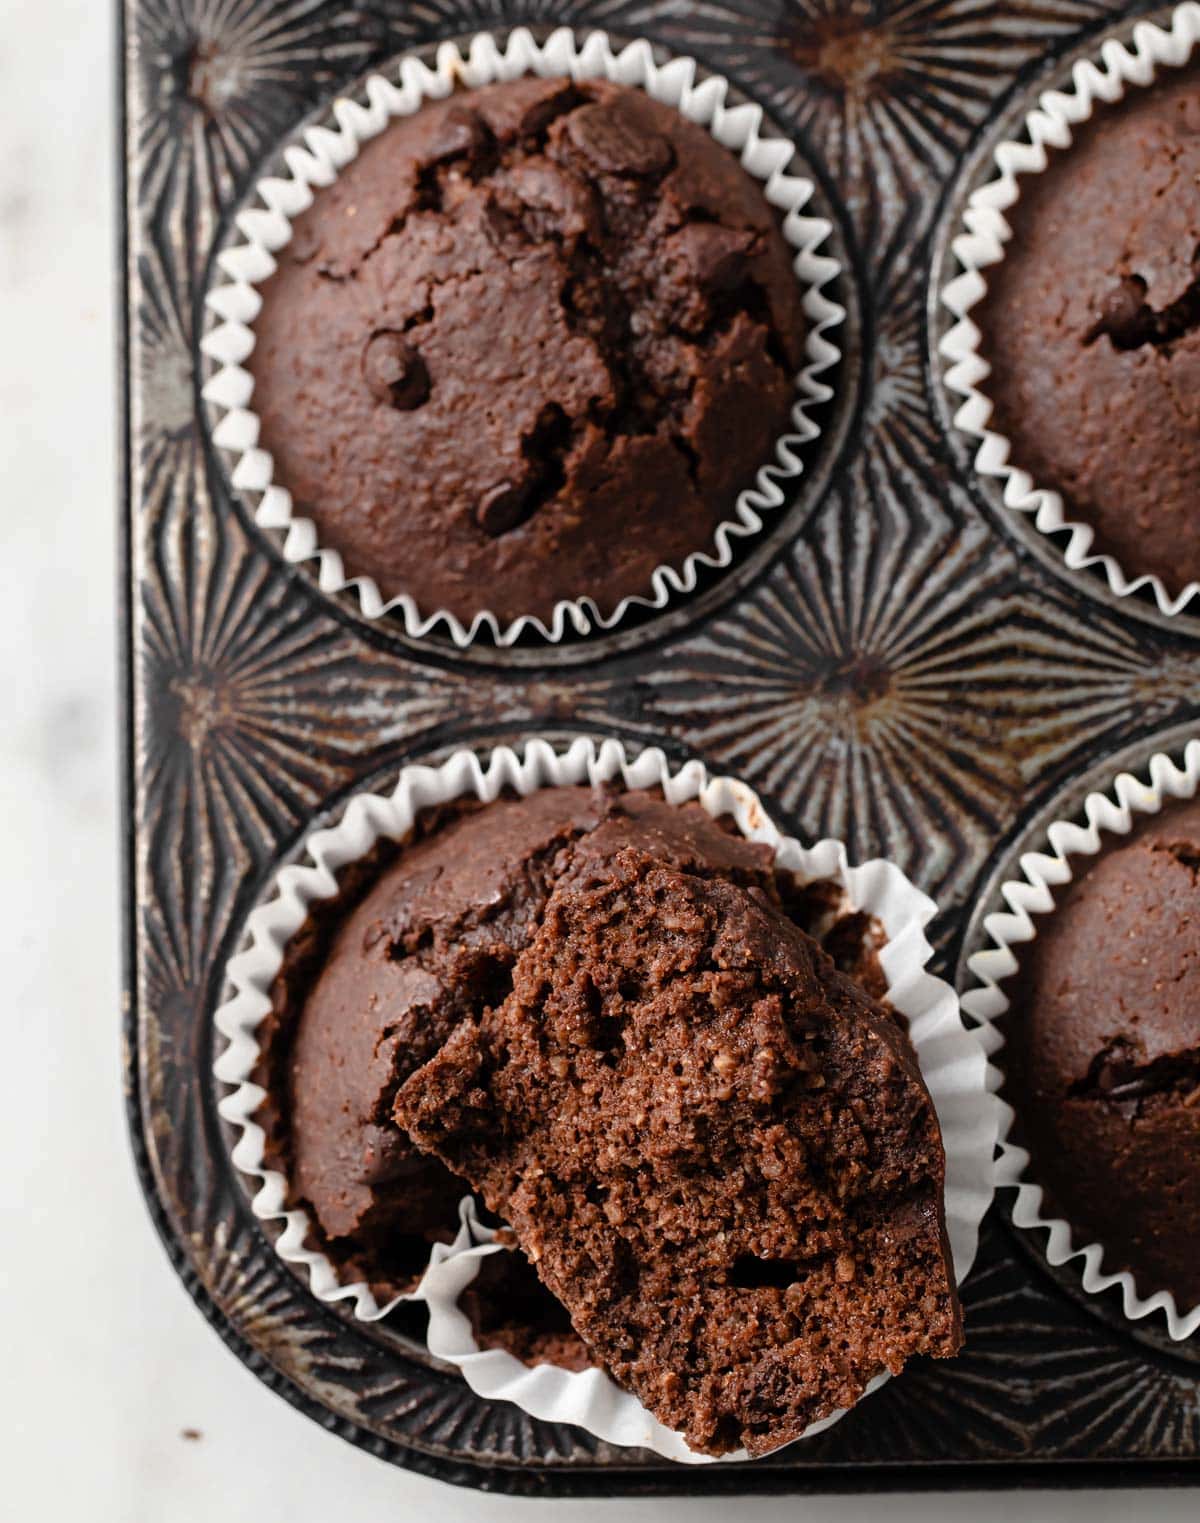 a muffin pan with almond flour chocolate muffins, one is broken in half showing the inside